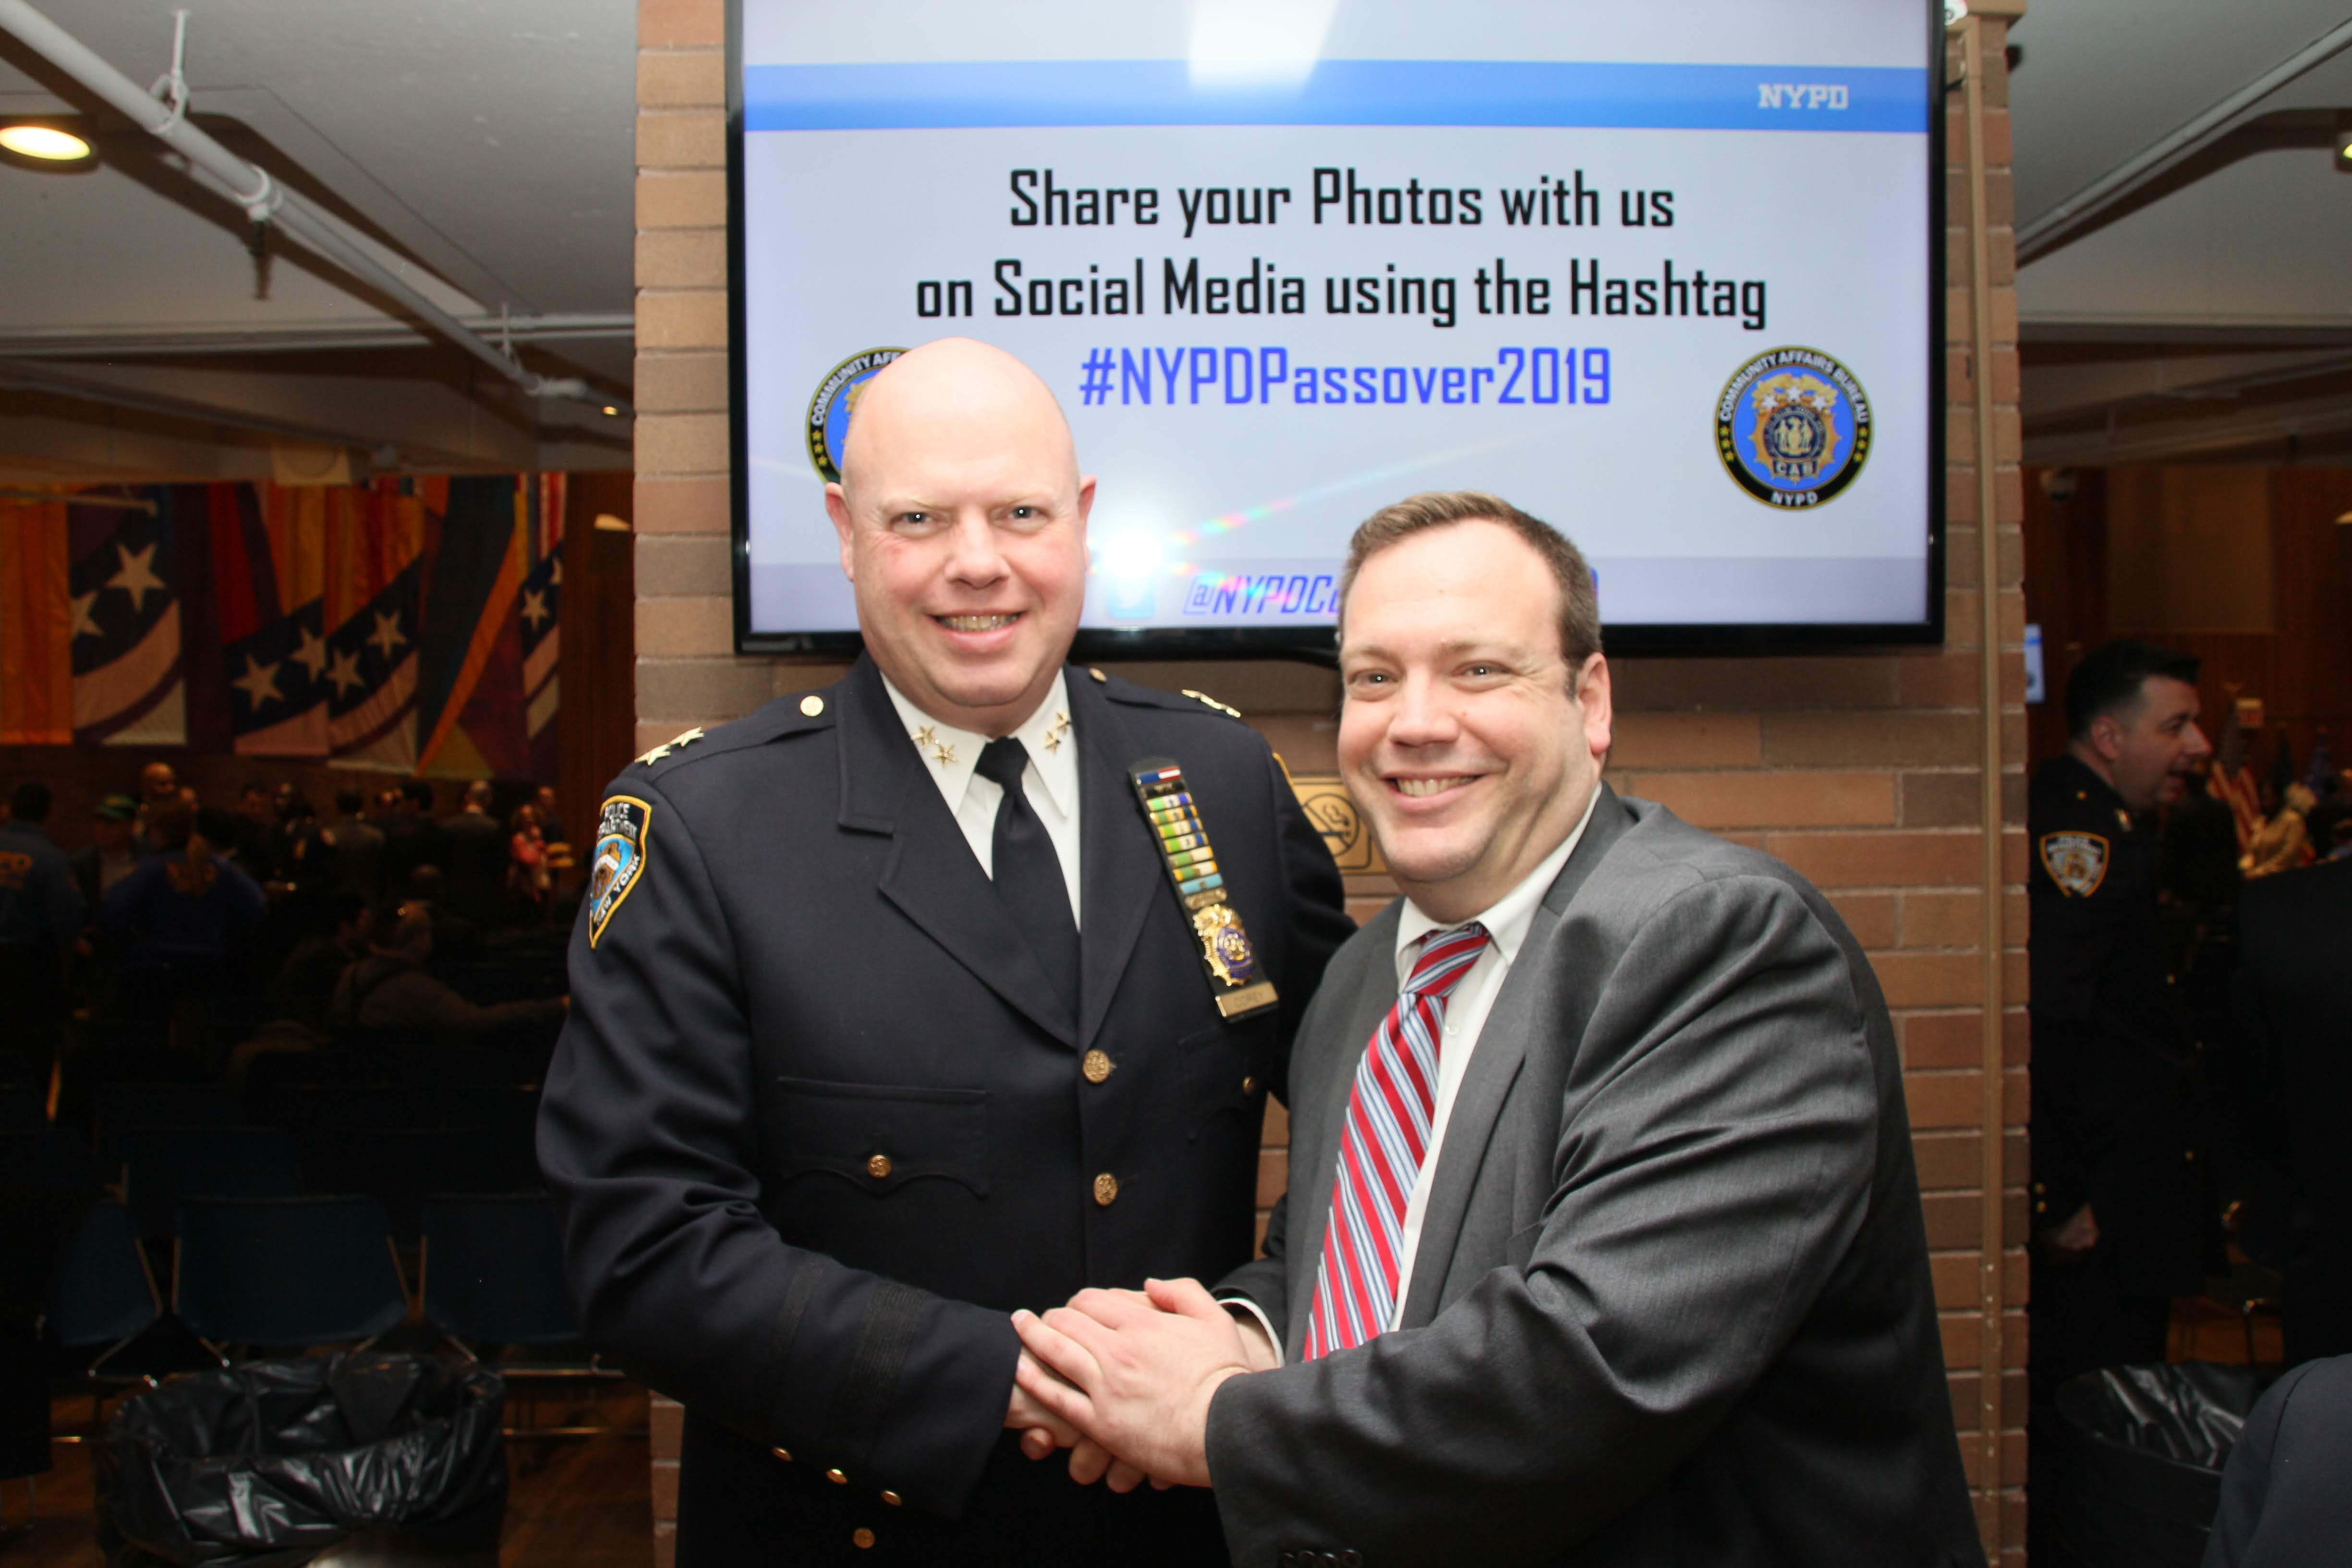 Annual NYPD Pre-Rosh Pesach Briefing at One Police Plaza - The Jewish Voice4898 x 3265